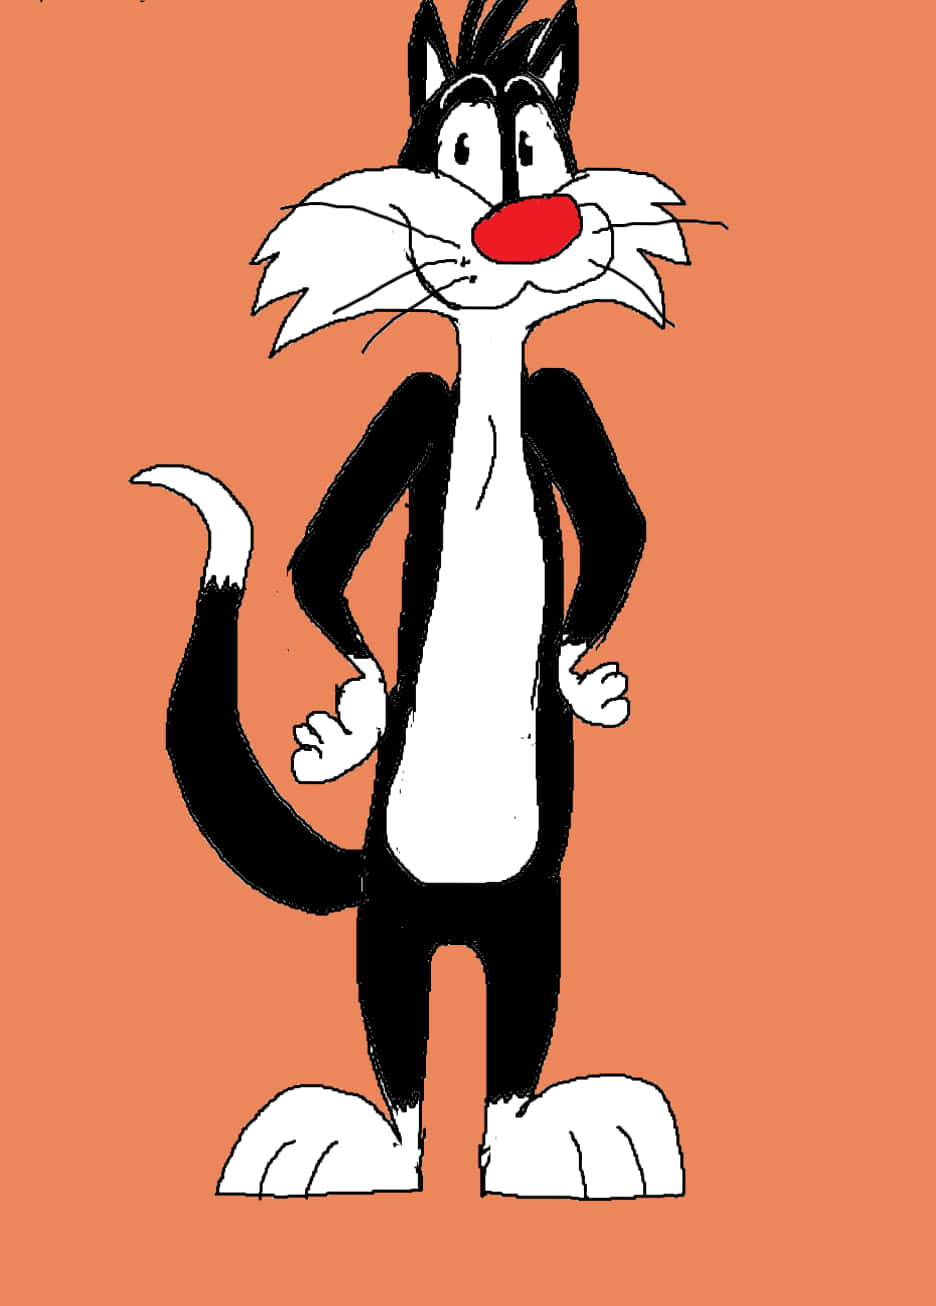 Download A Cartoon Cat With Red Eyes And A Black Nose | Wallpapers.com